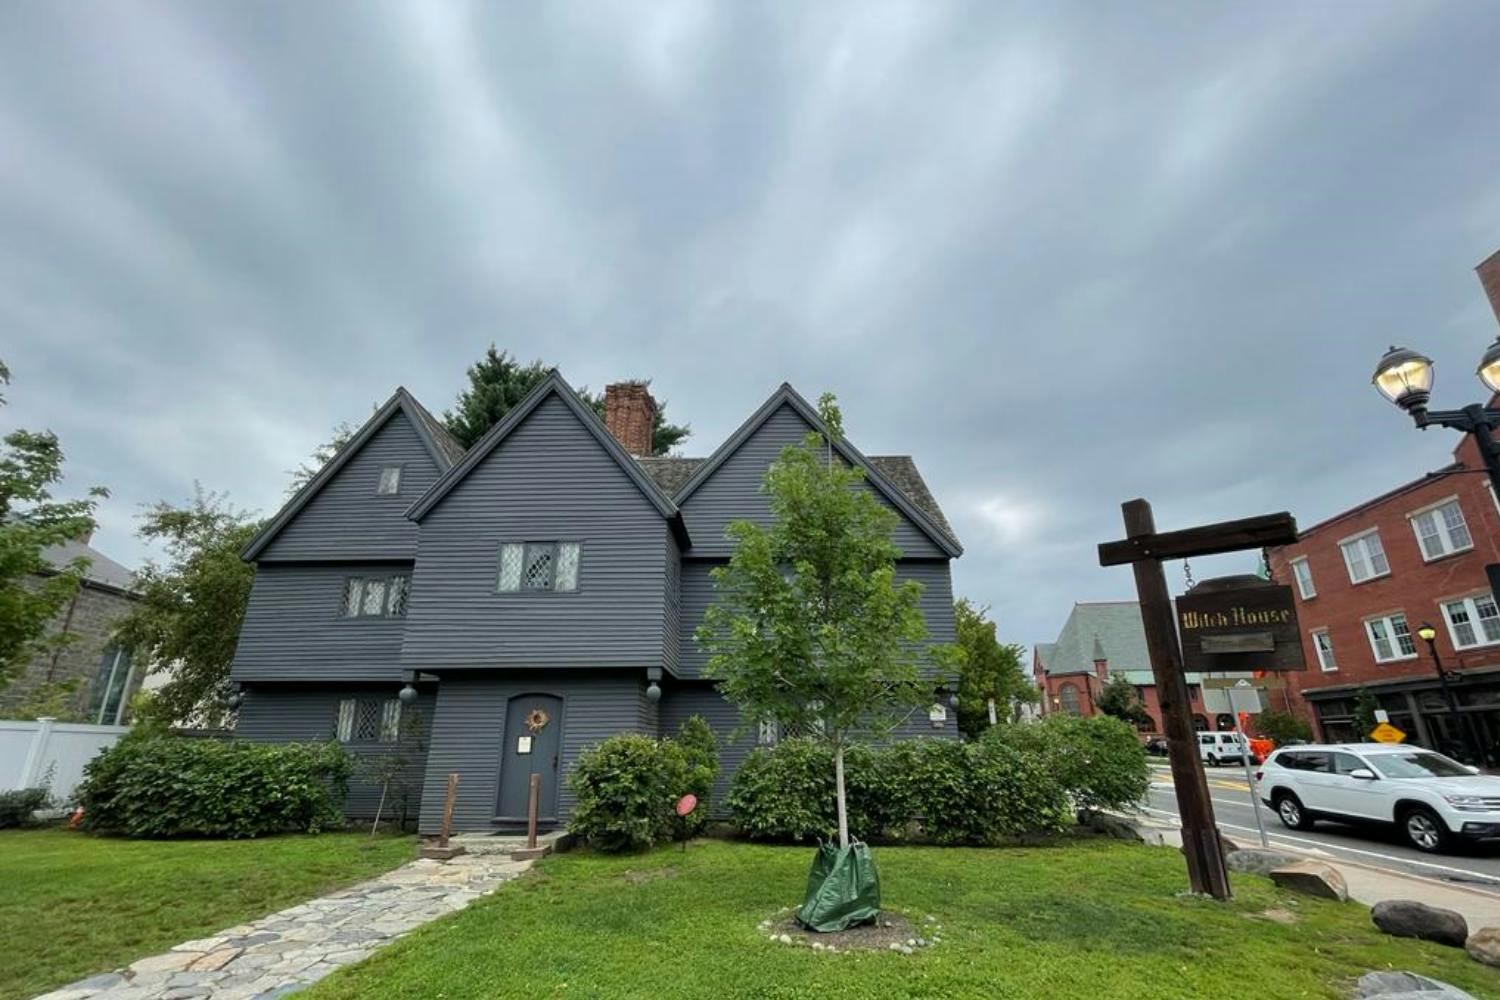 Salem and the witch trials self-guided walking audio tour